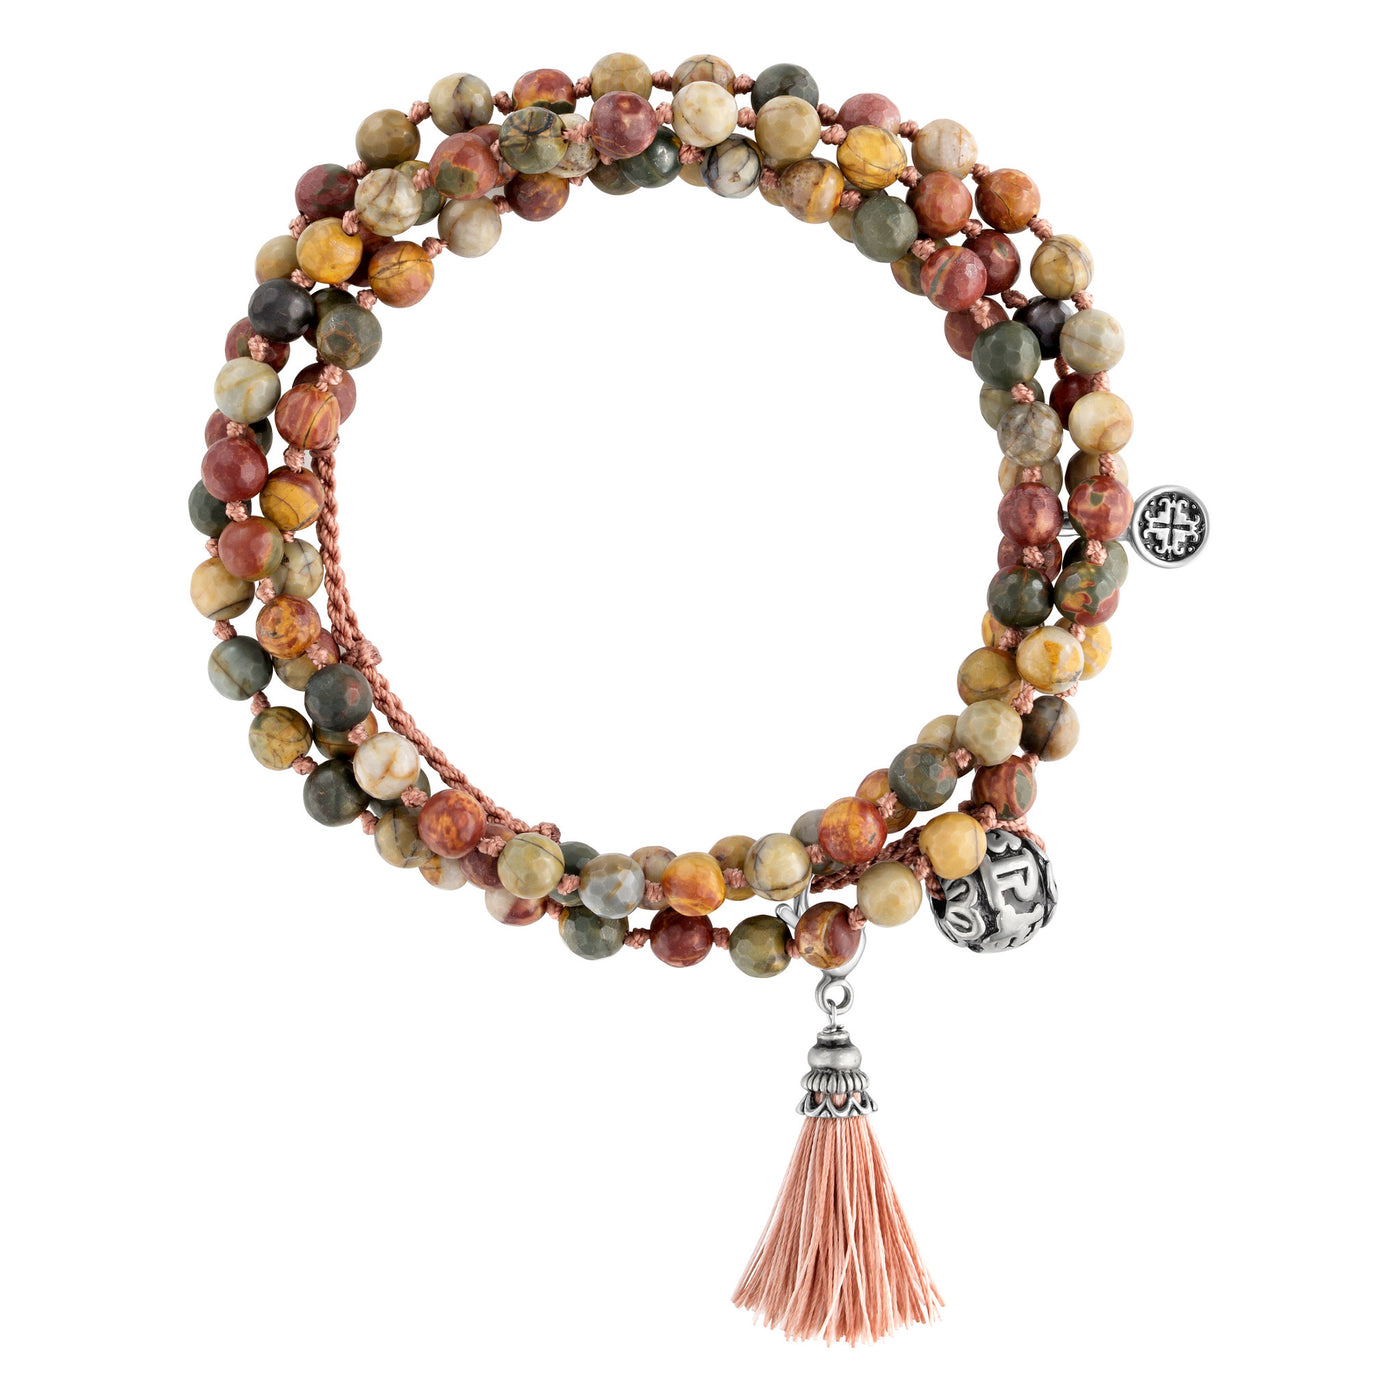 RELAXATION: Red Creek Jasper Faceted 108 Bead Hand-Knotted Adjustable Wrap Mala